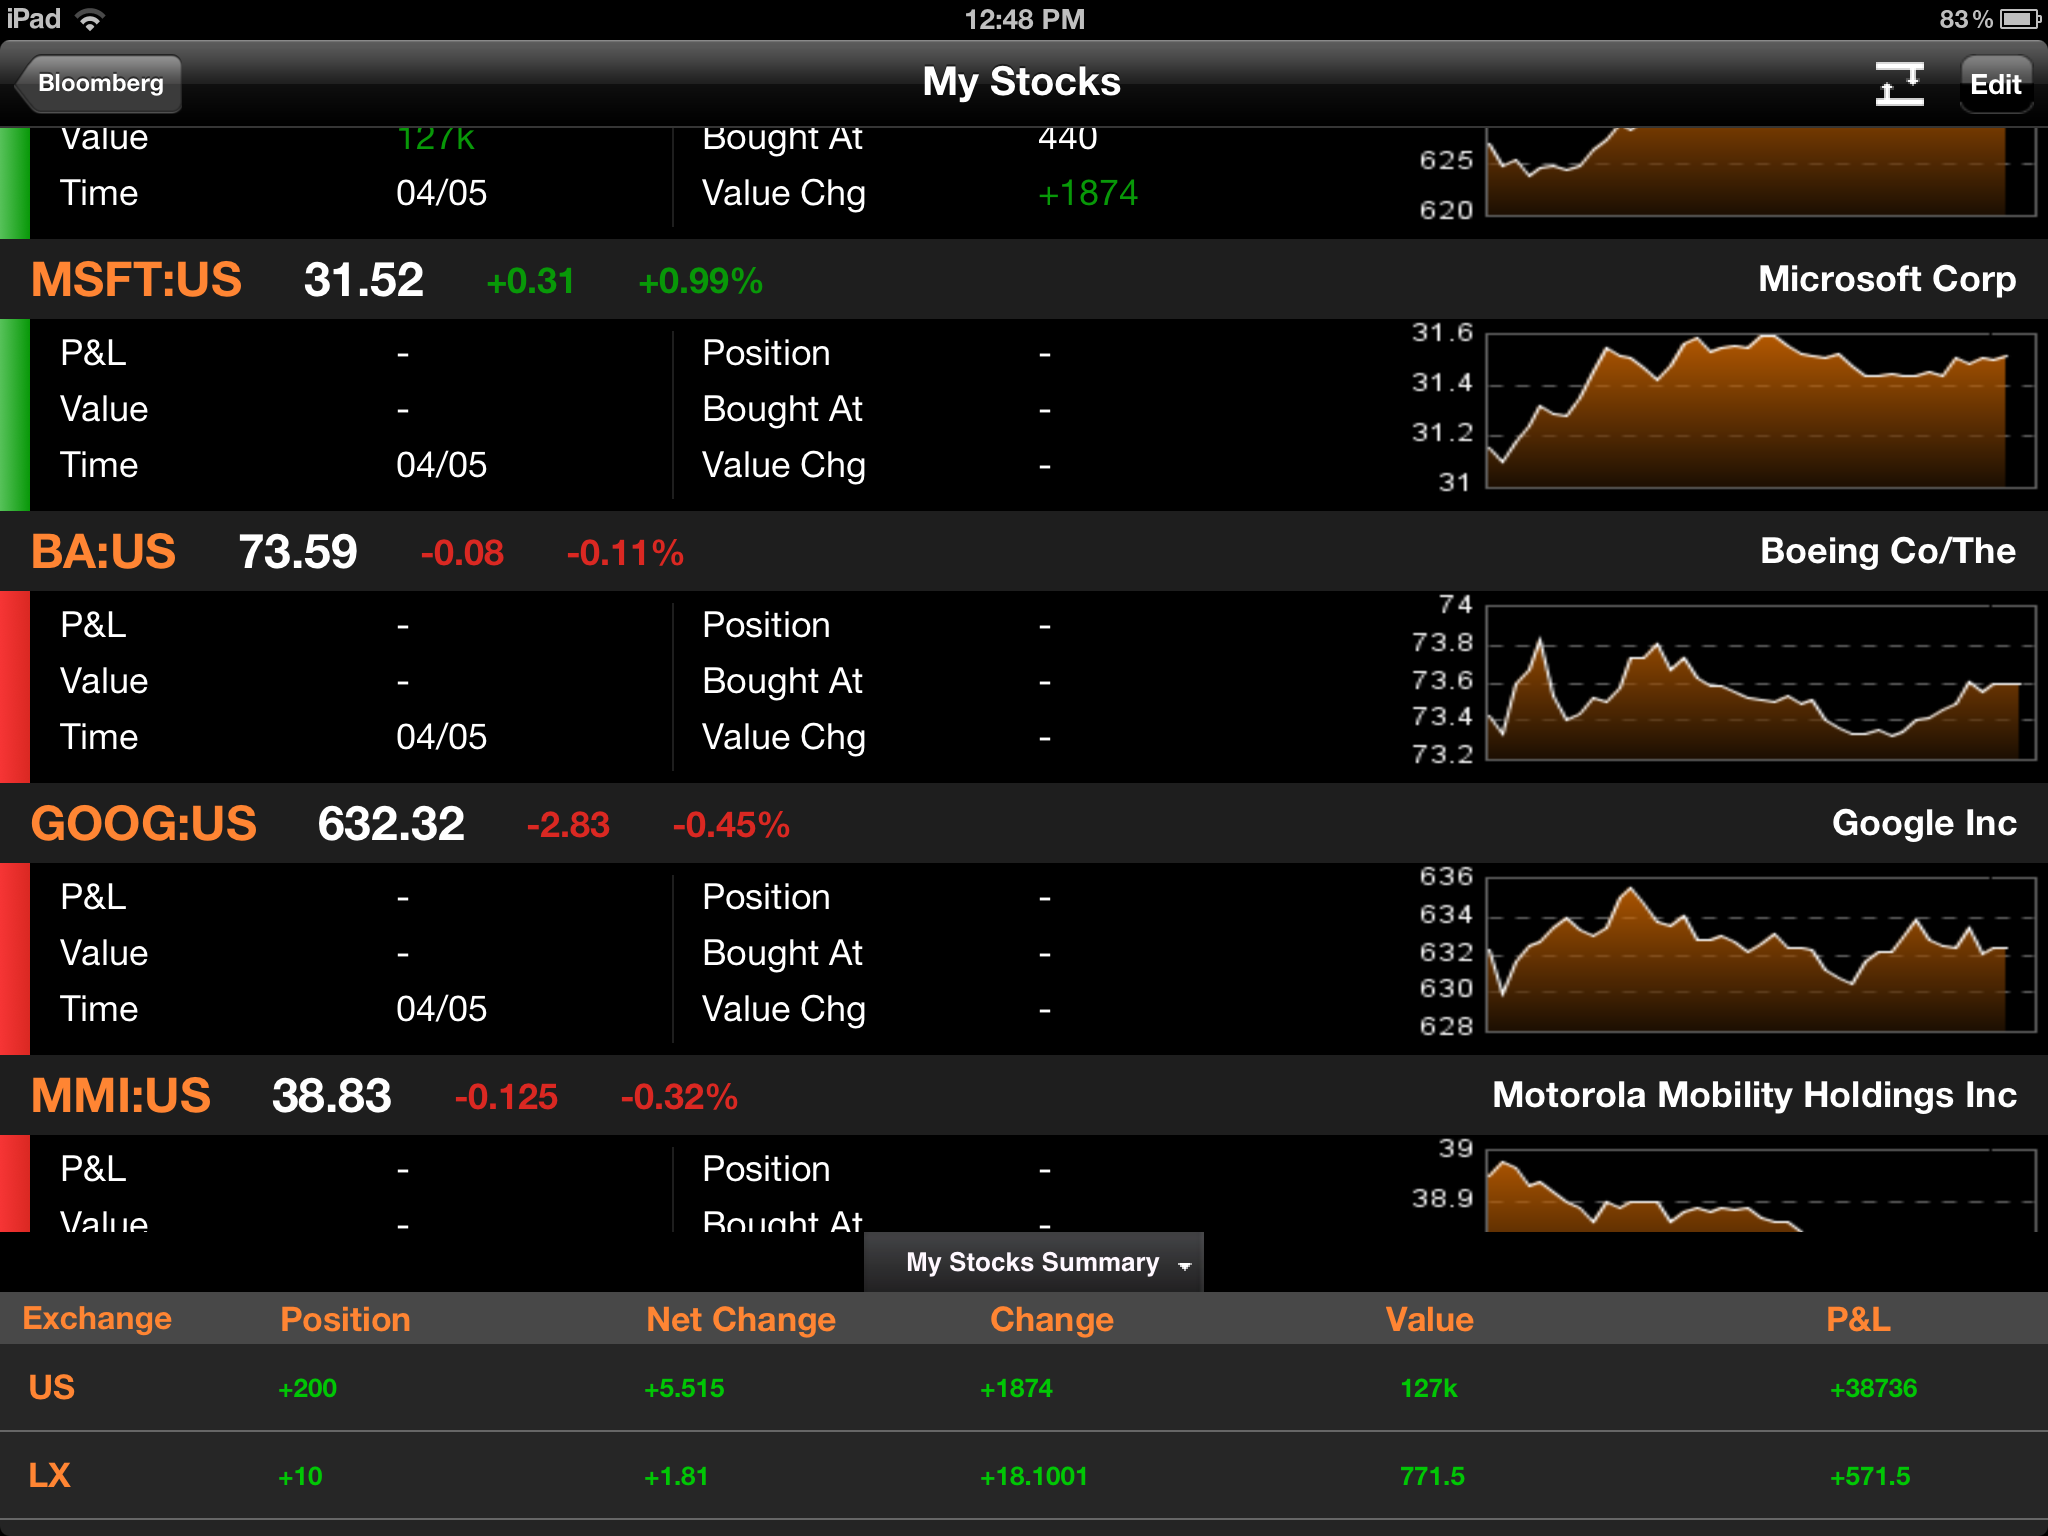 View a summary of your stocks with Bloomberg for iPad